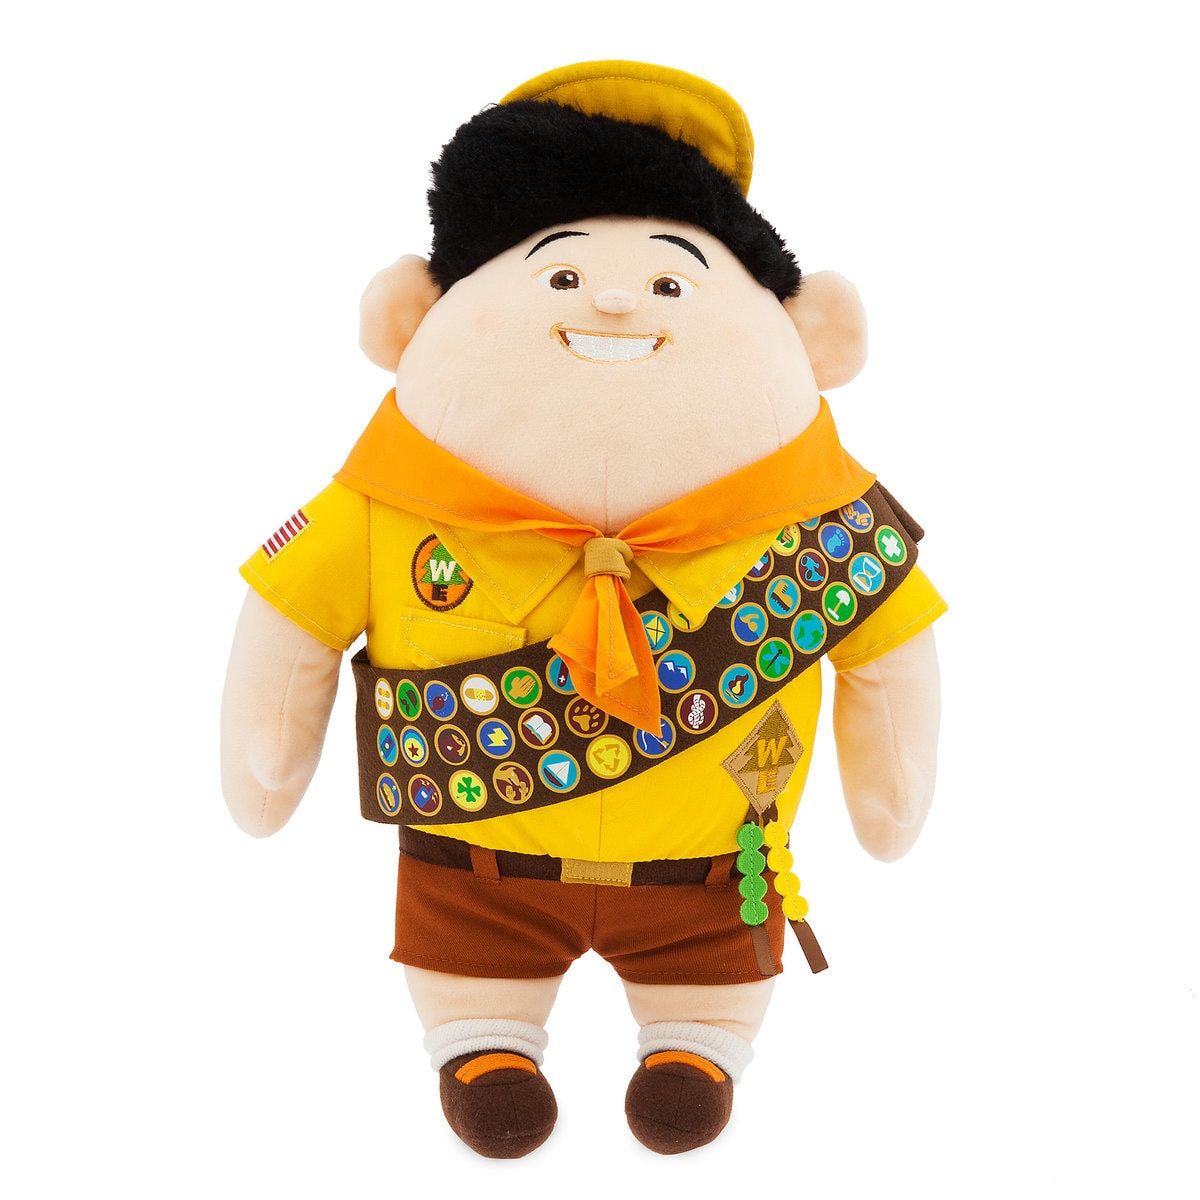 Disney Store Russell from Up 10th Anniversary Medium Plush New with Tags